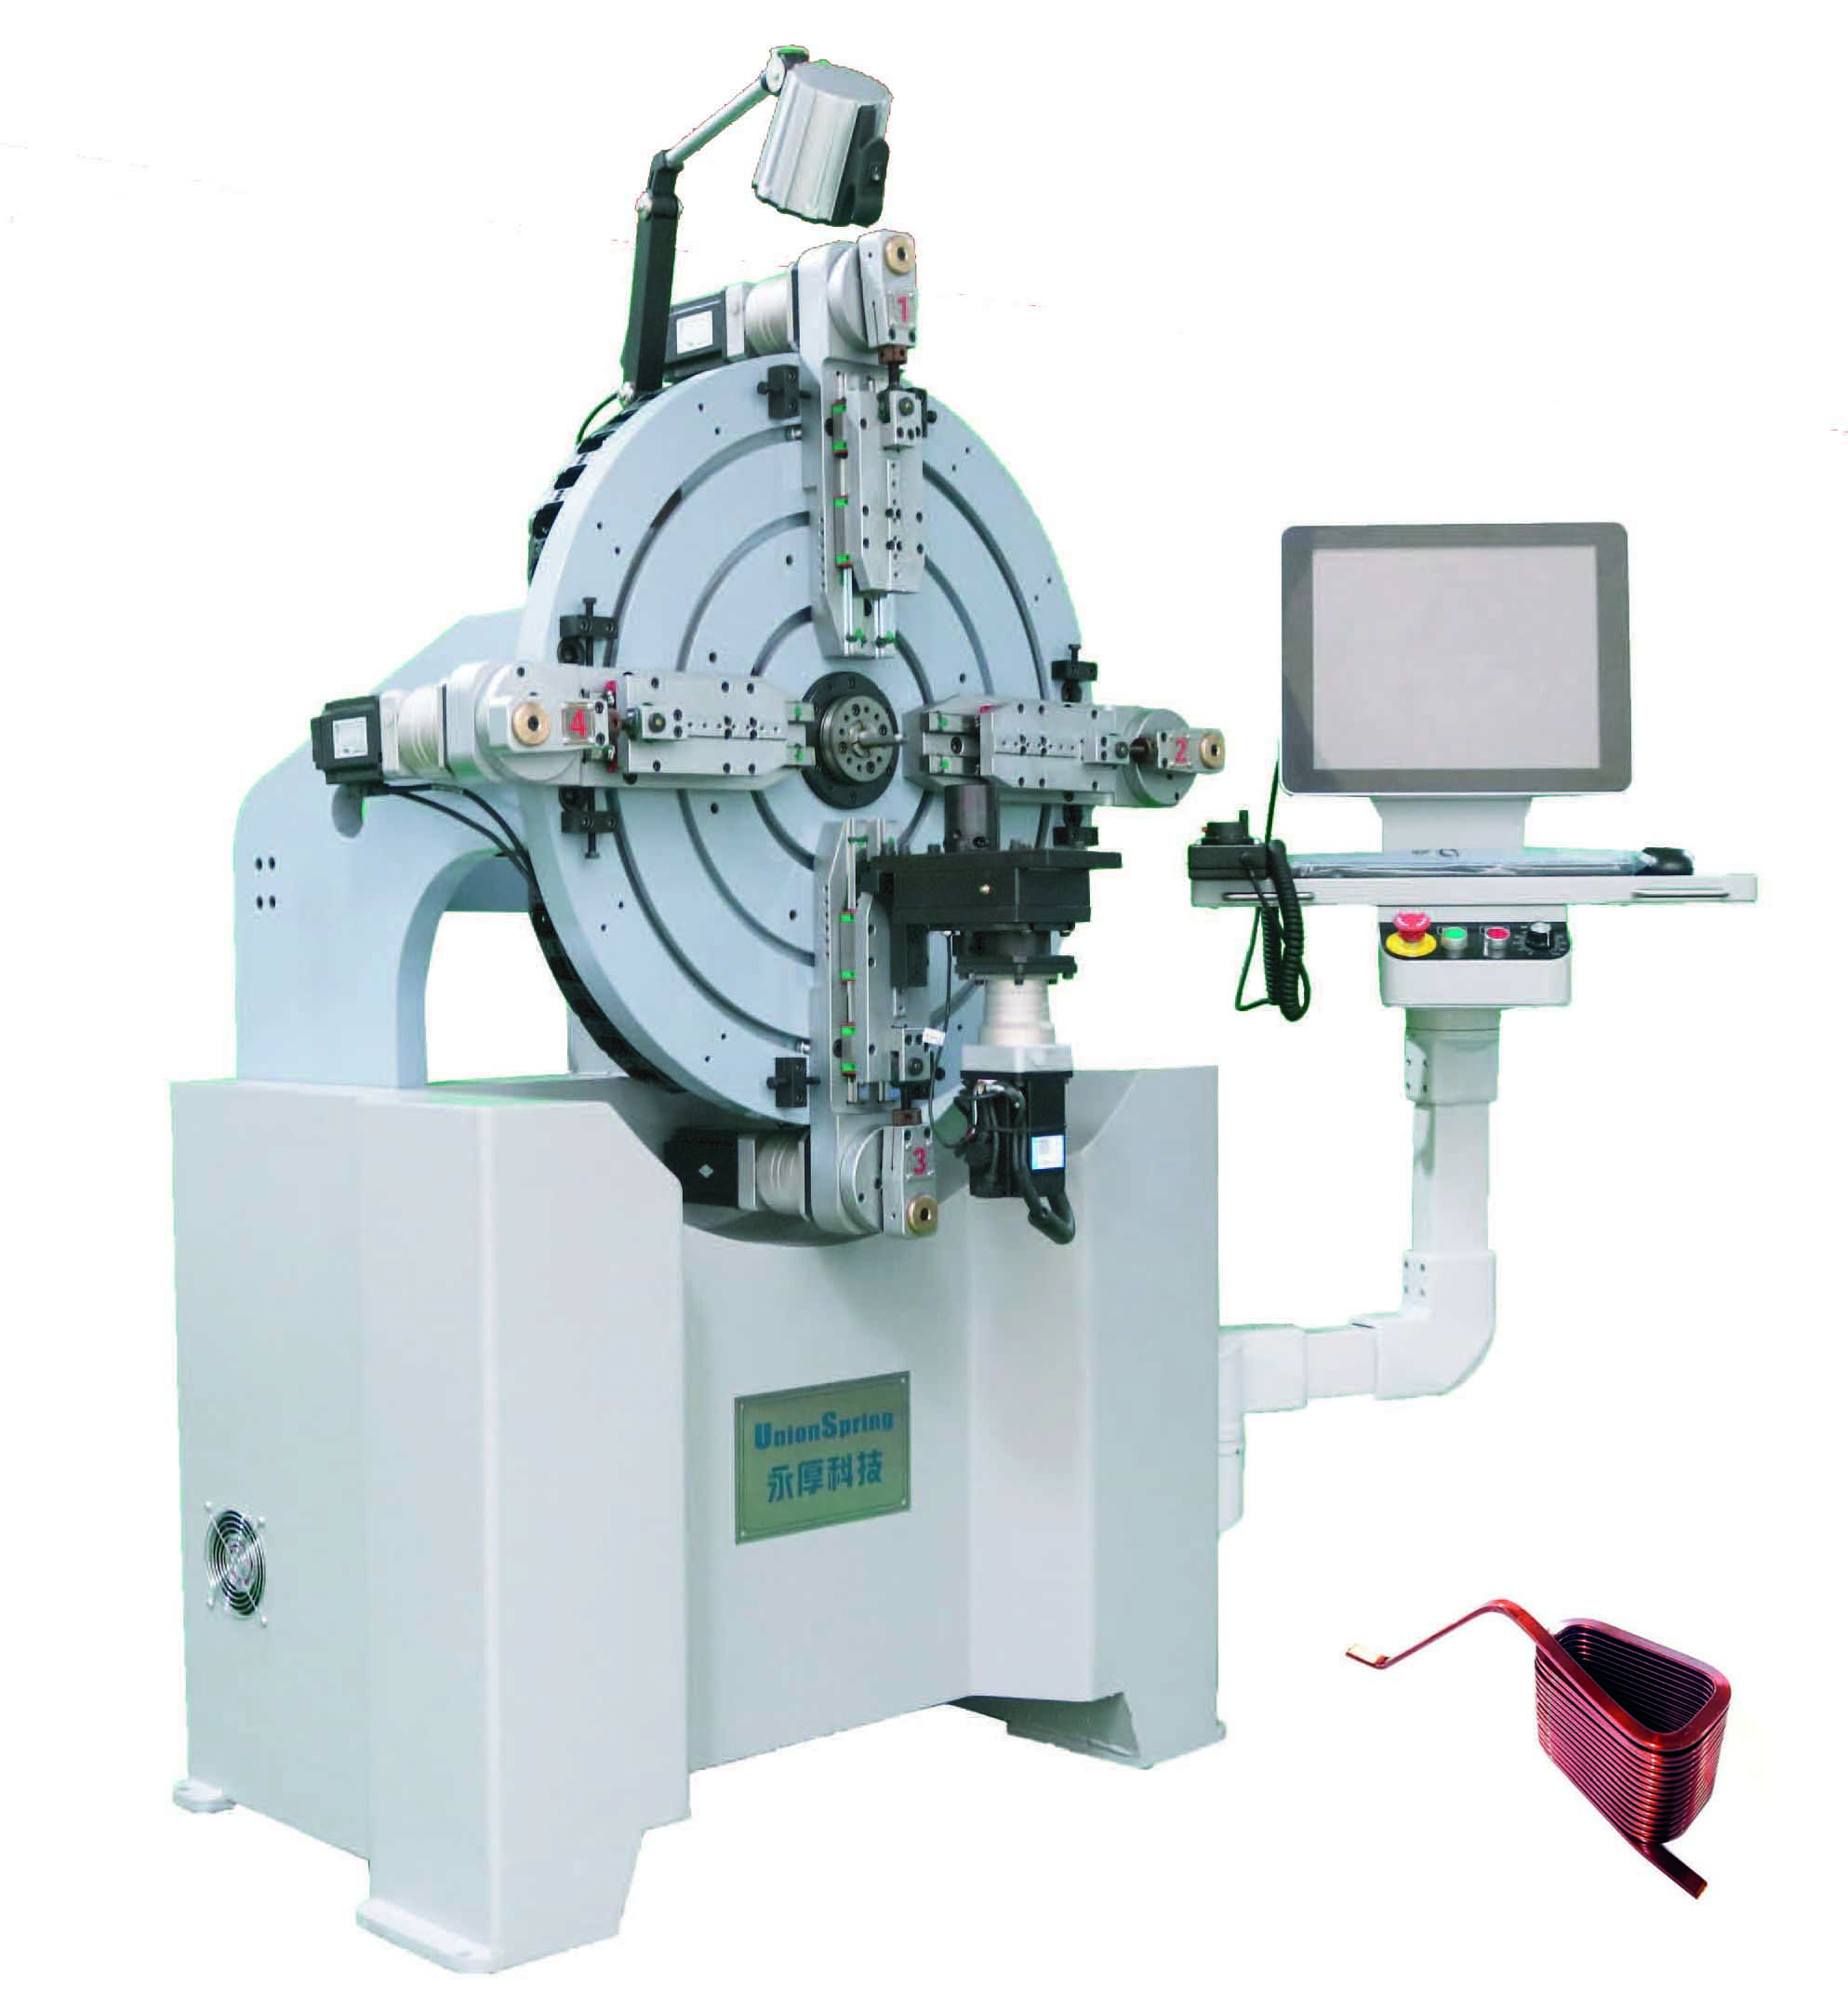 Motor inductor coil winding machine, CNC Copper Flat Wire Inductor Coil Winding Machine US-650, Enameled wire bending machine